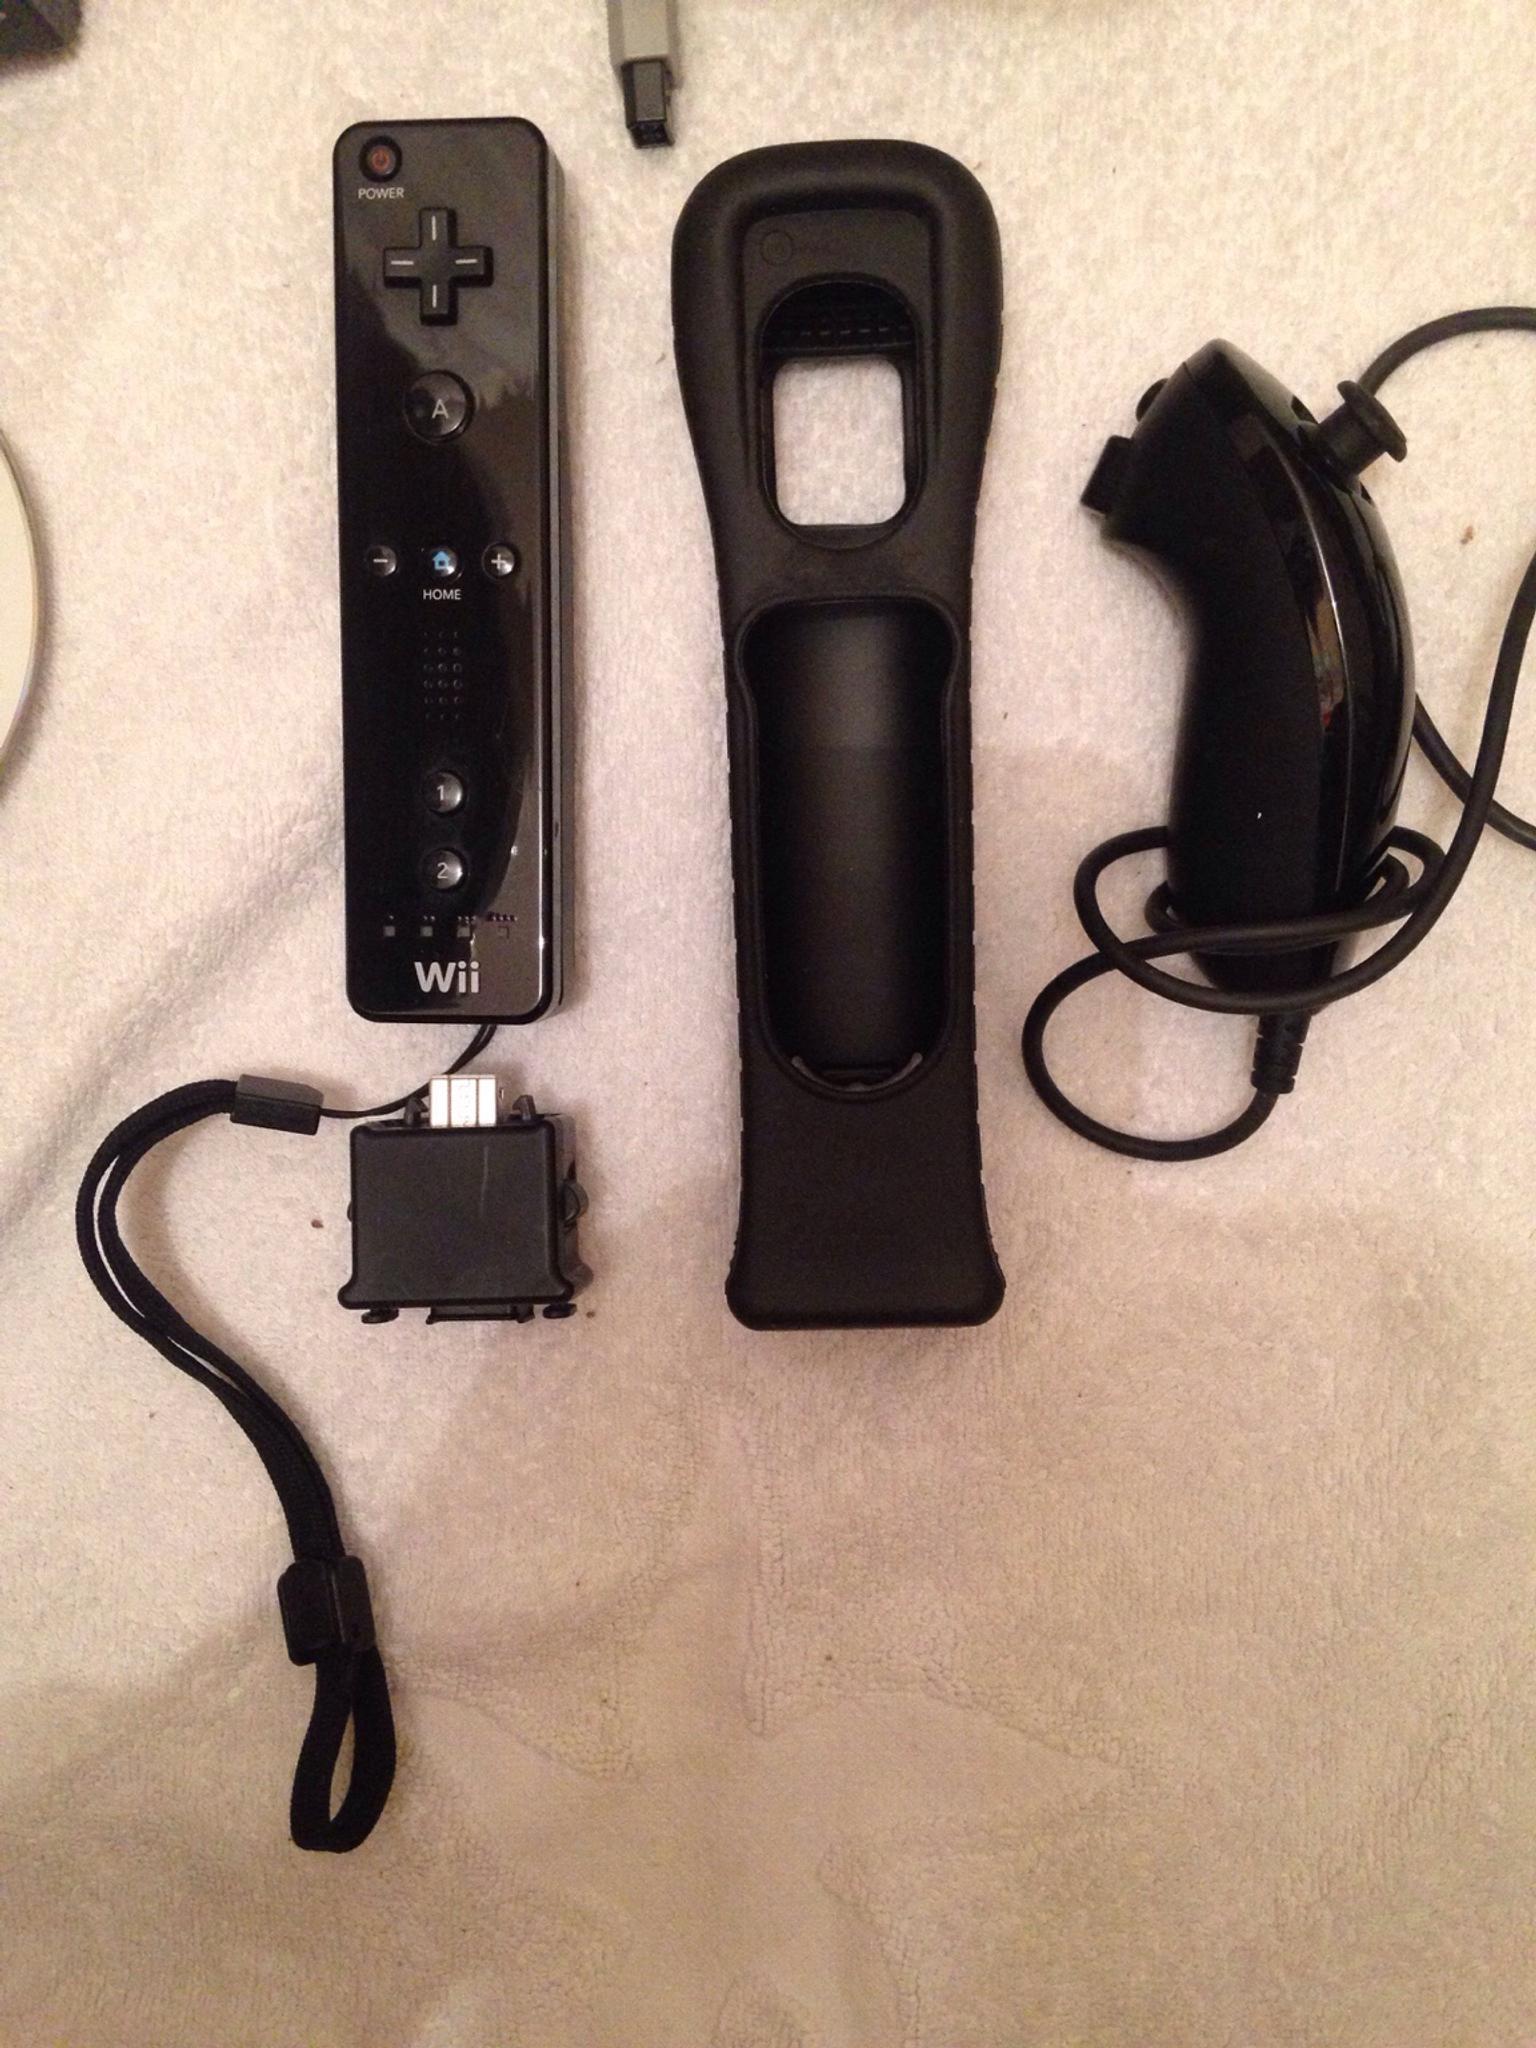 Nintendo Wii Black Console Controller Extras In Sw18 Wandsworth For 95 00 For Sale Shpock